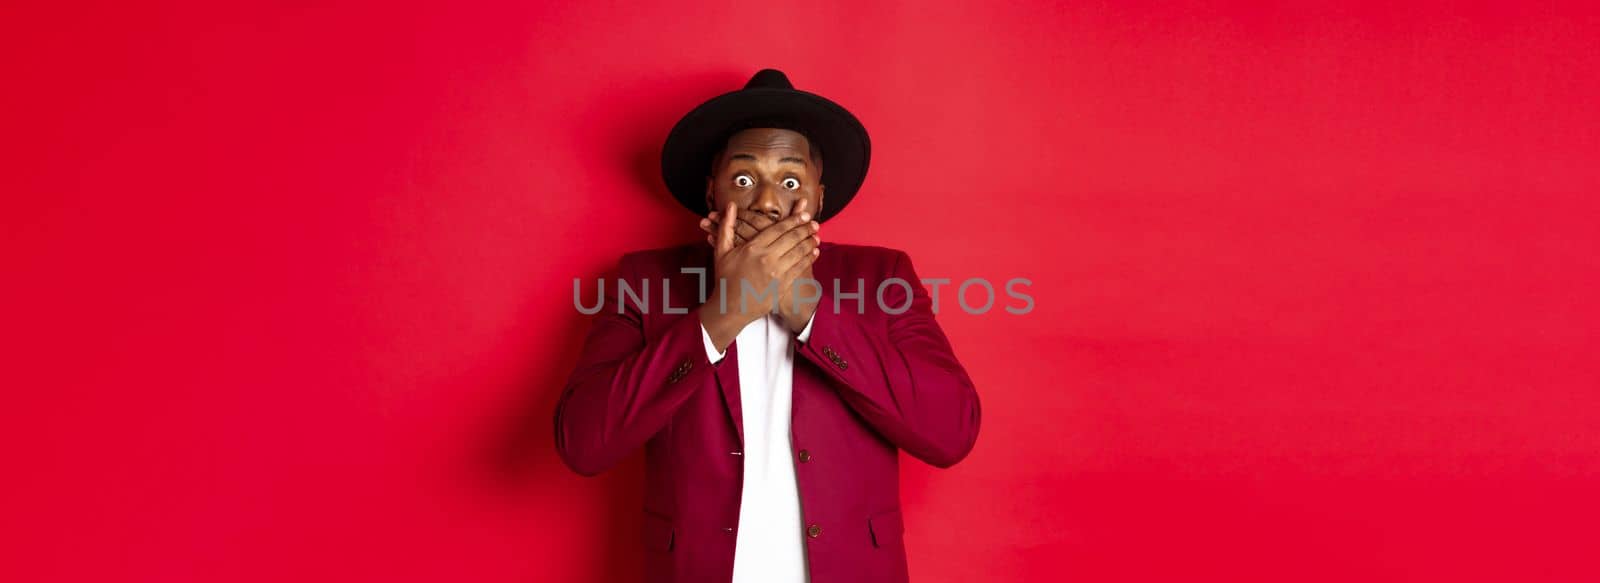 Christmas shopping and people concept. Shocked black man looking startled at camera, covering mouth with hands, standing against red background.